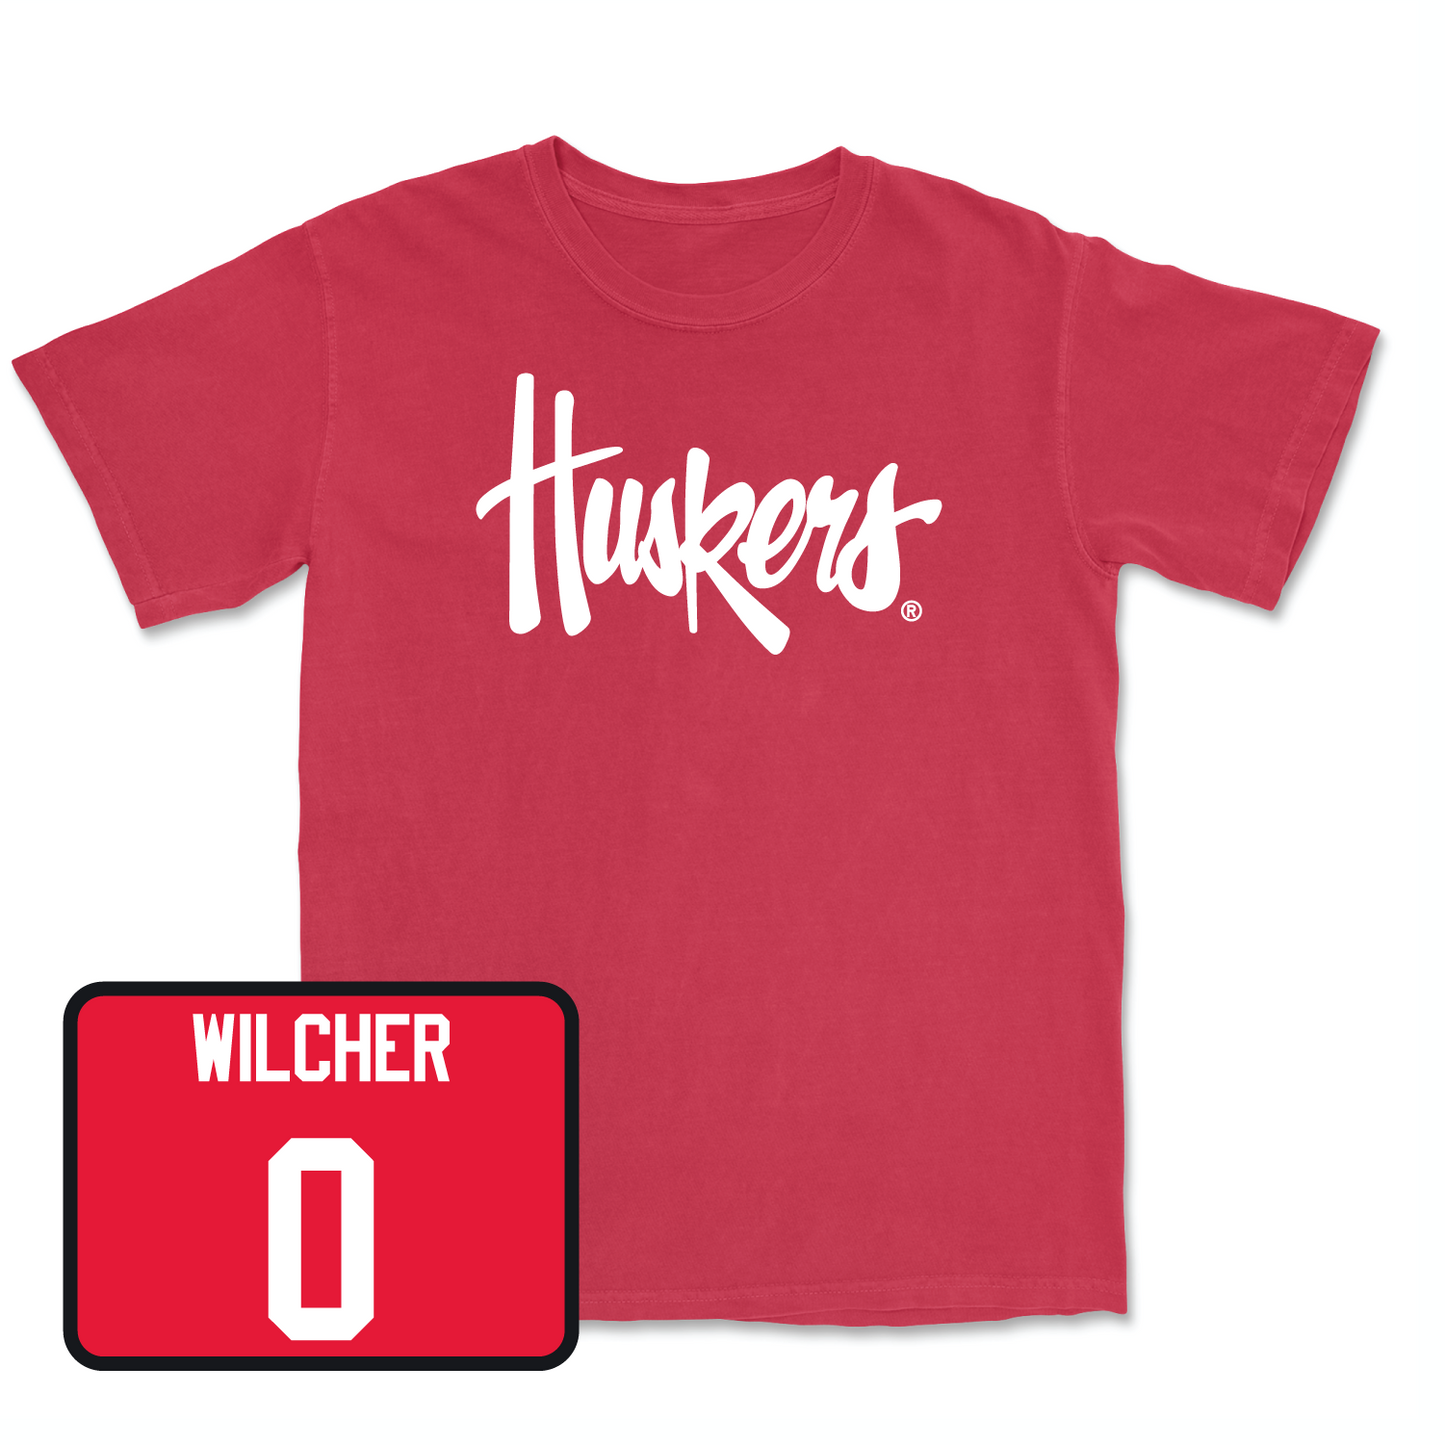 Red Men's Basketball Huskers Tee Youth Large / C.J. Wilcher | #0